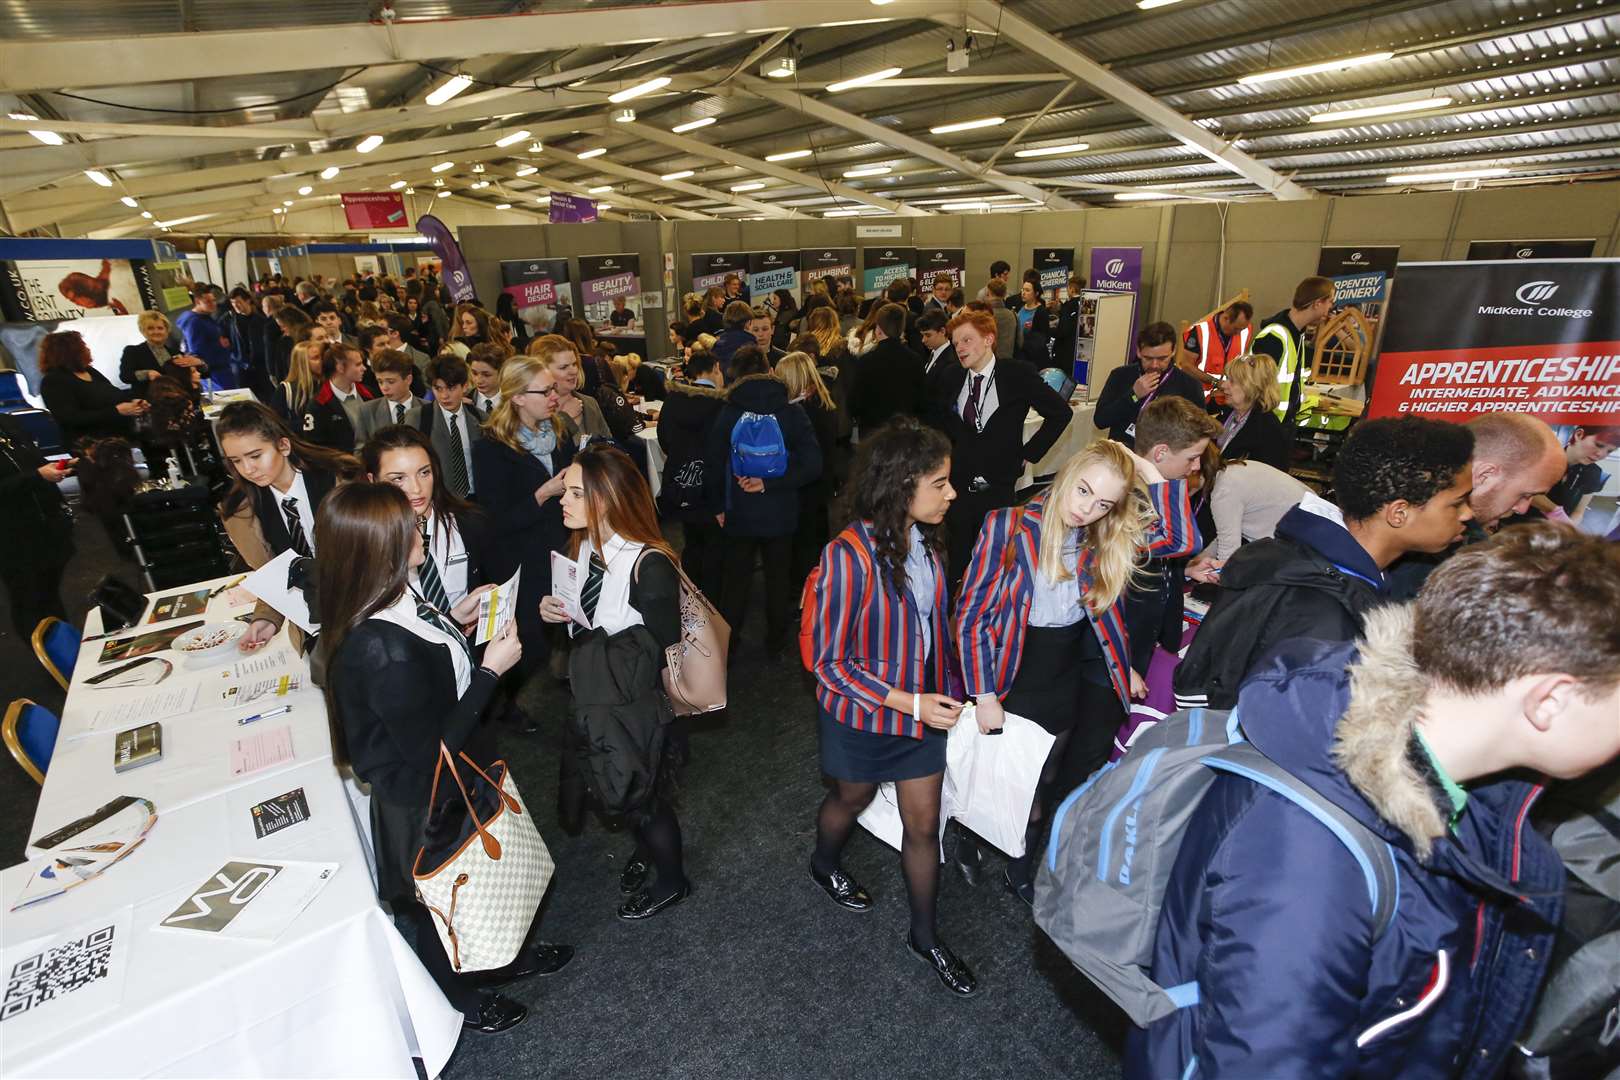 KentChoices Live careers fair expects a record attendance this year